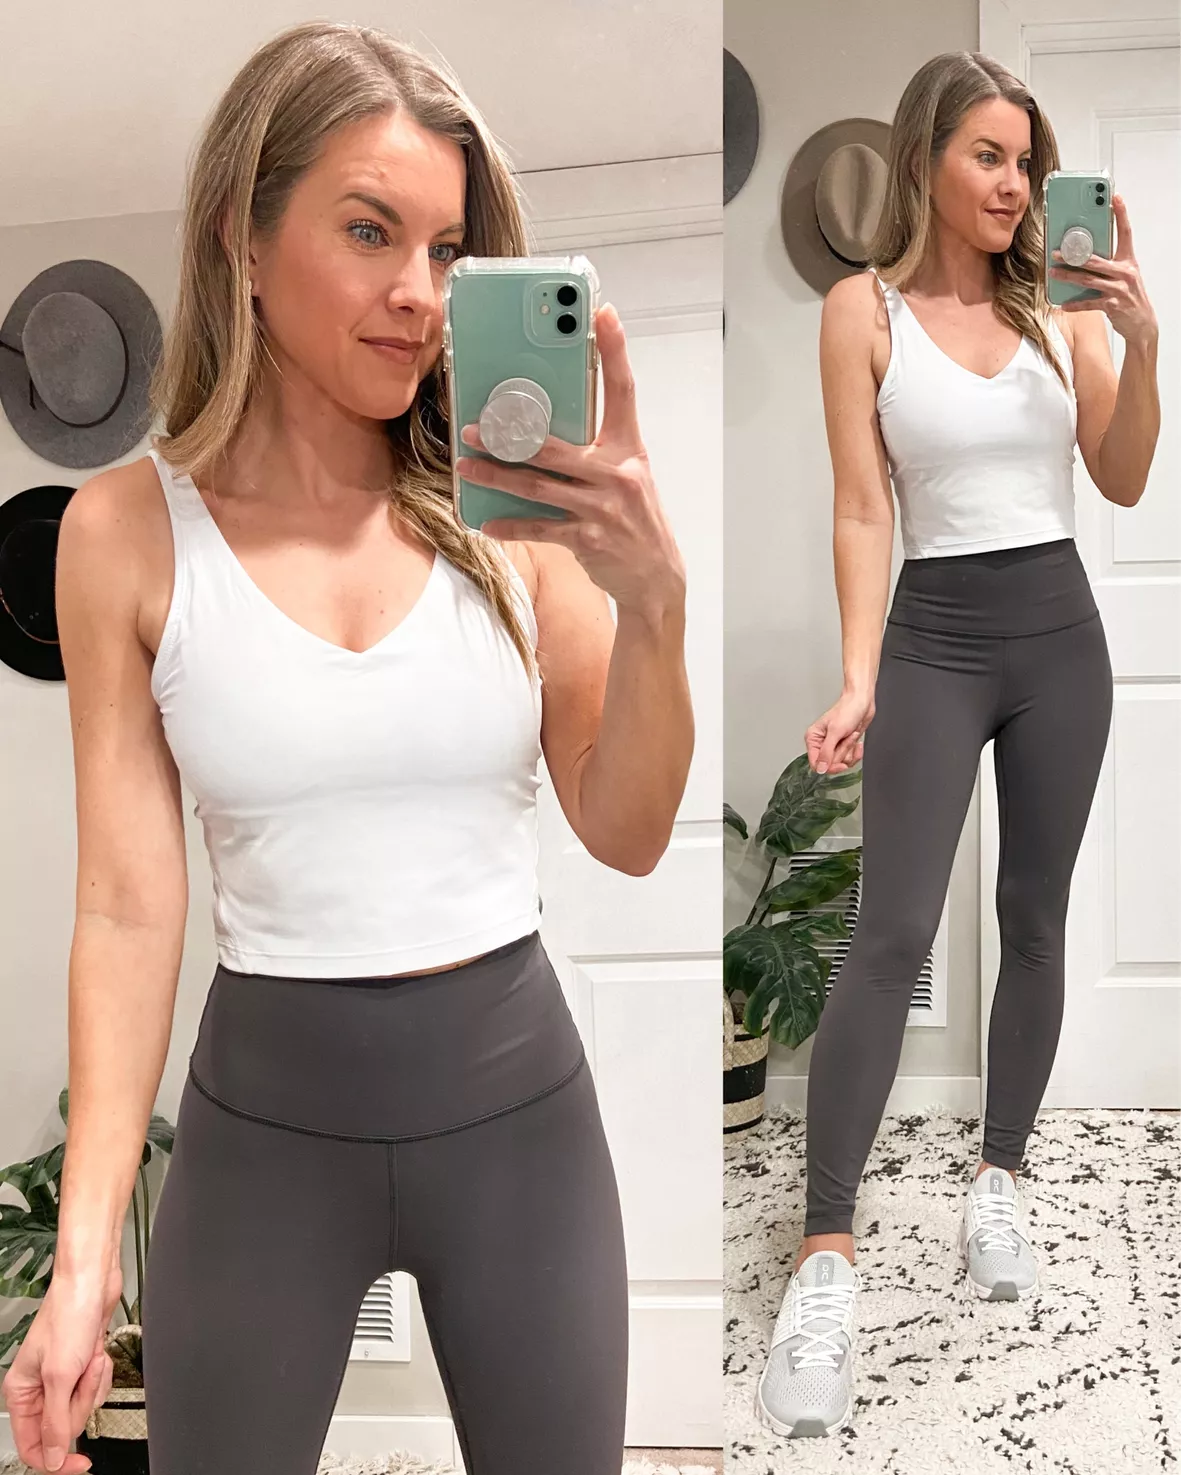 Lululemon  dupe, Gallery posted by Teddy